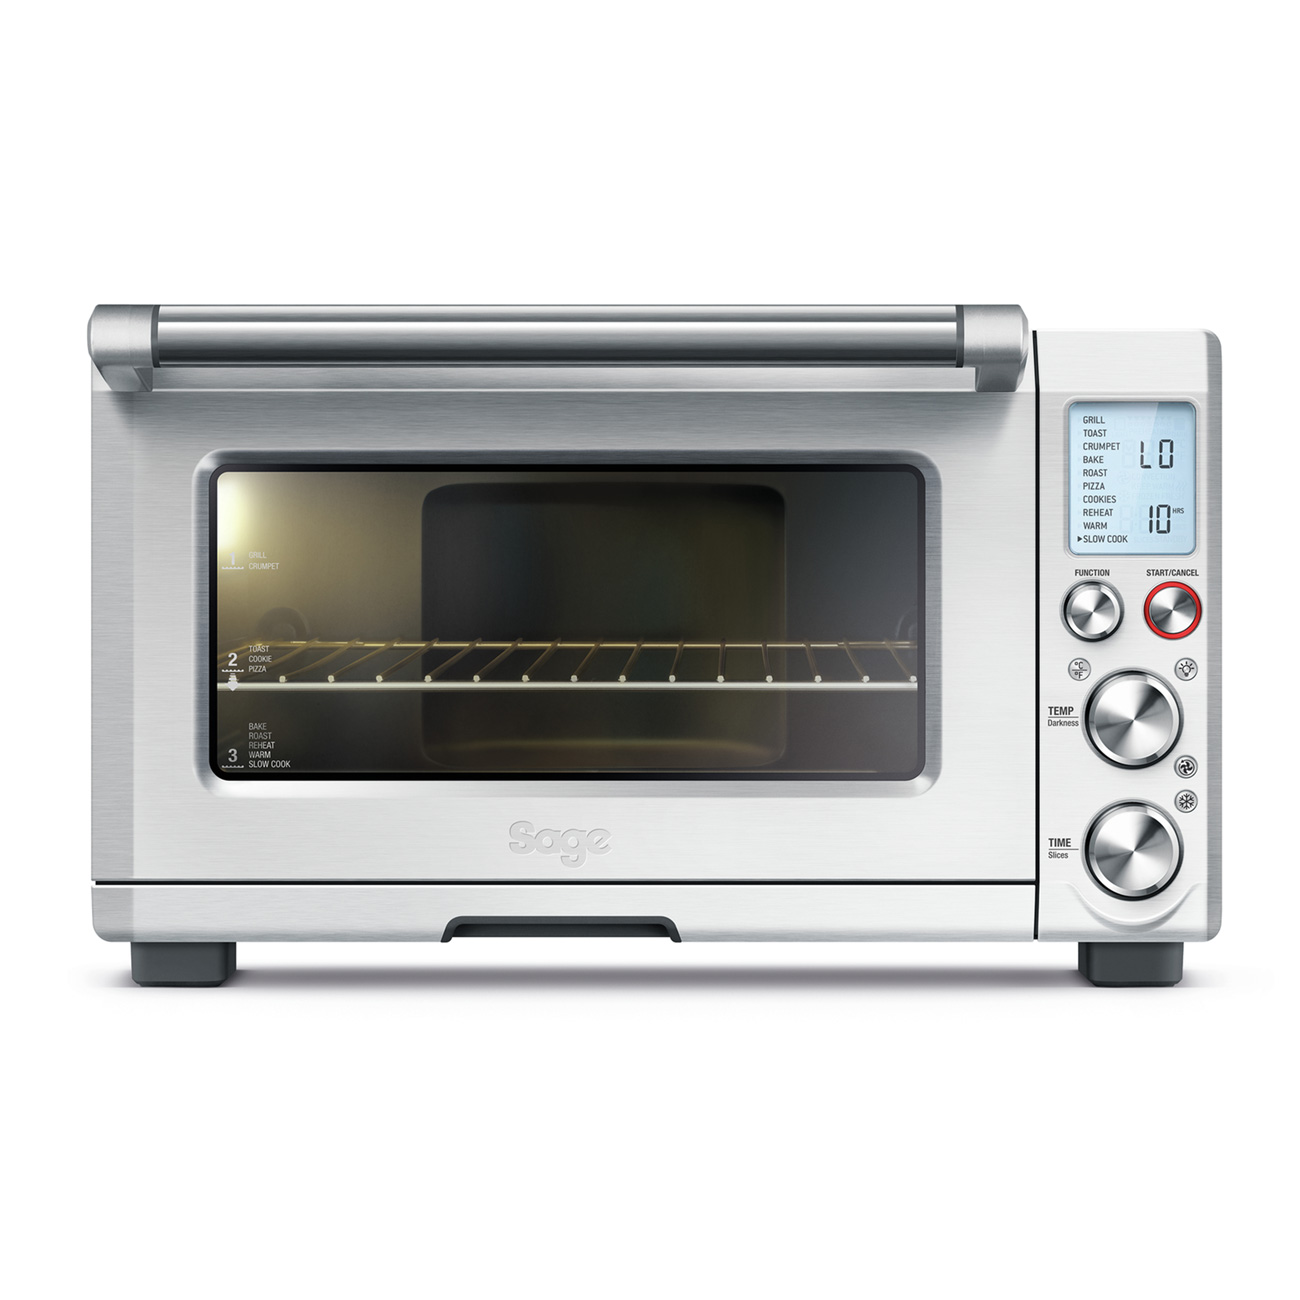 What is a Smart Oven?